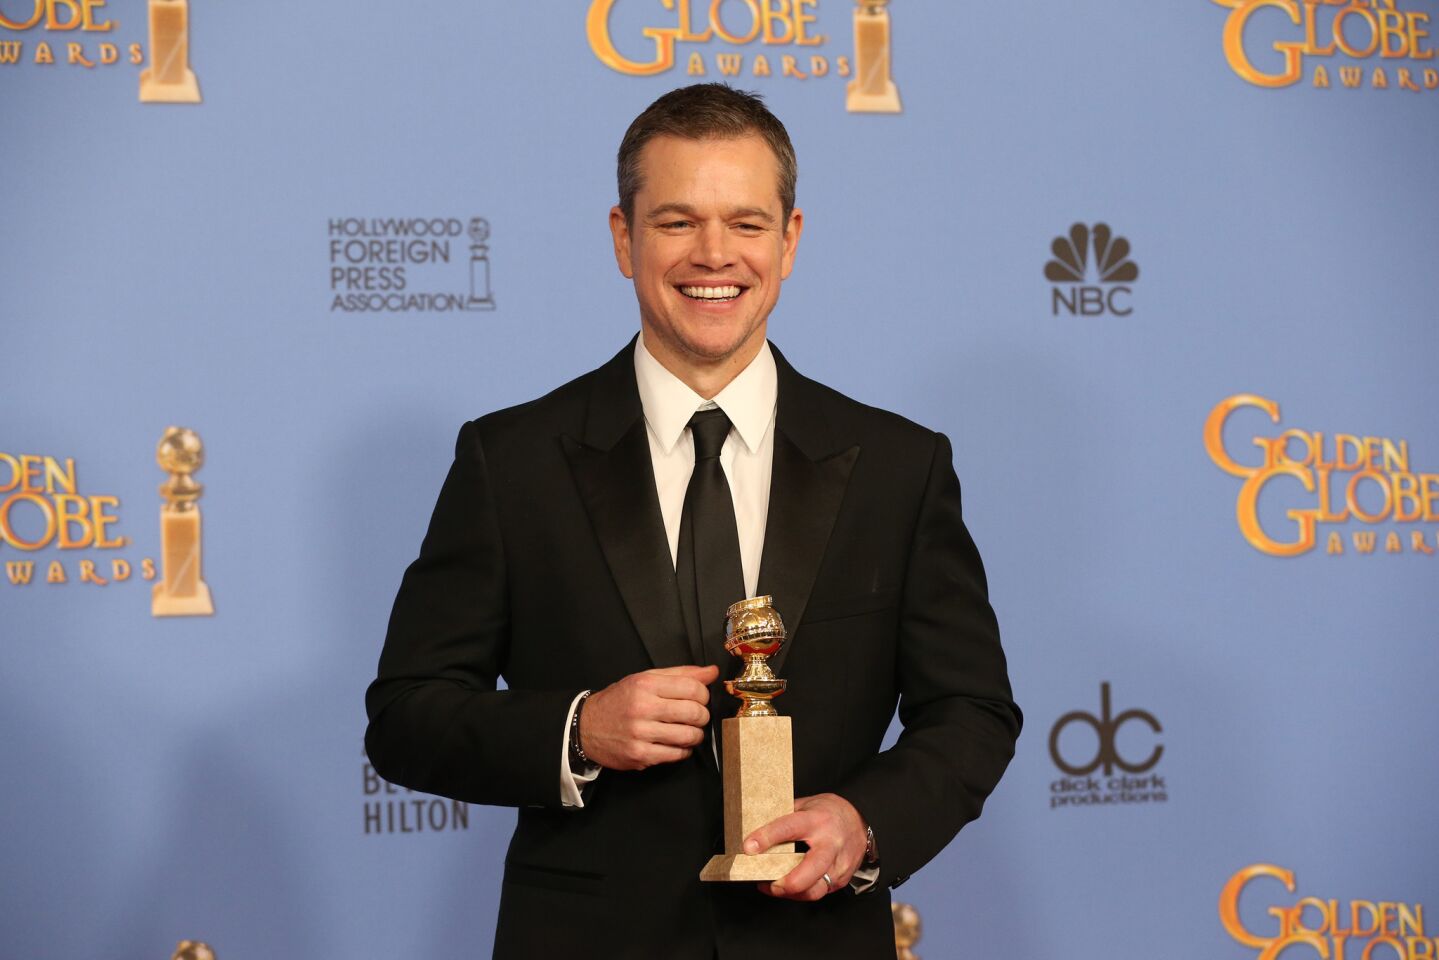 Matt Damon, winner for Performance by an Actor in a Motion Picture, Musical or Comedy, at the 73rd Annual Golden Globe Awards show at the Beverly Hilton Hotel on Jan. 10, 2016.